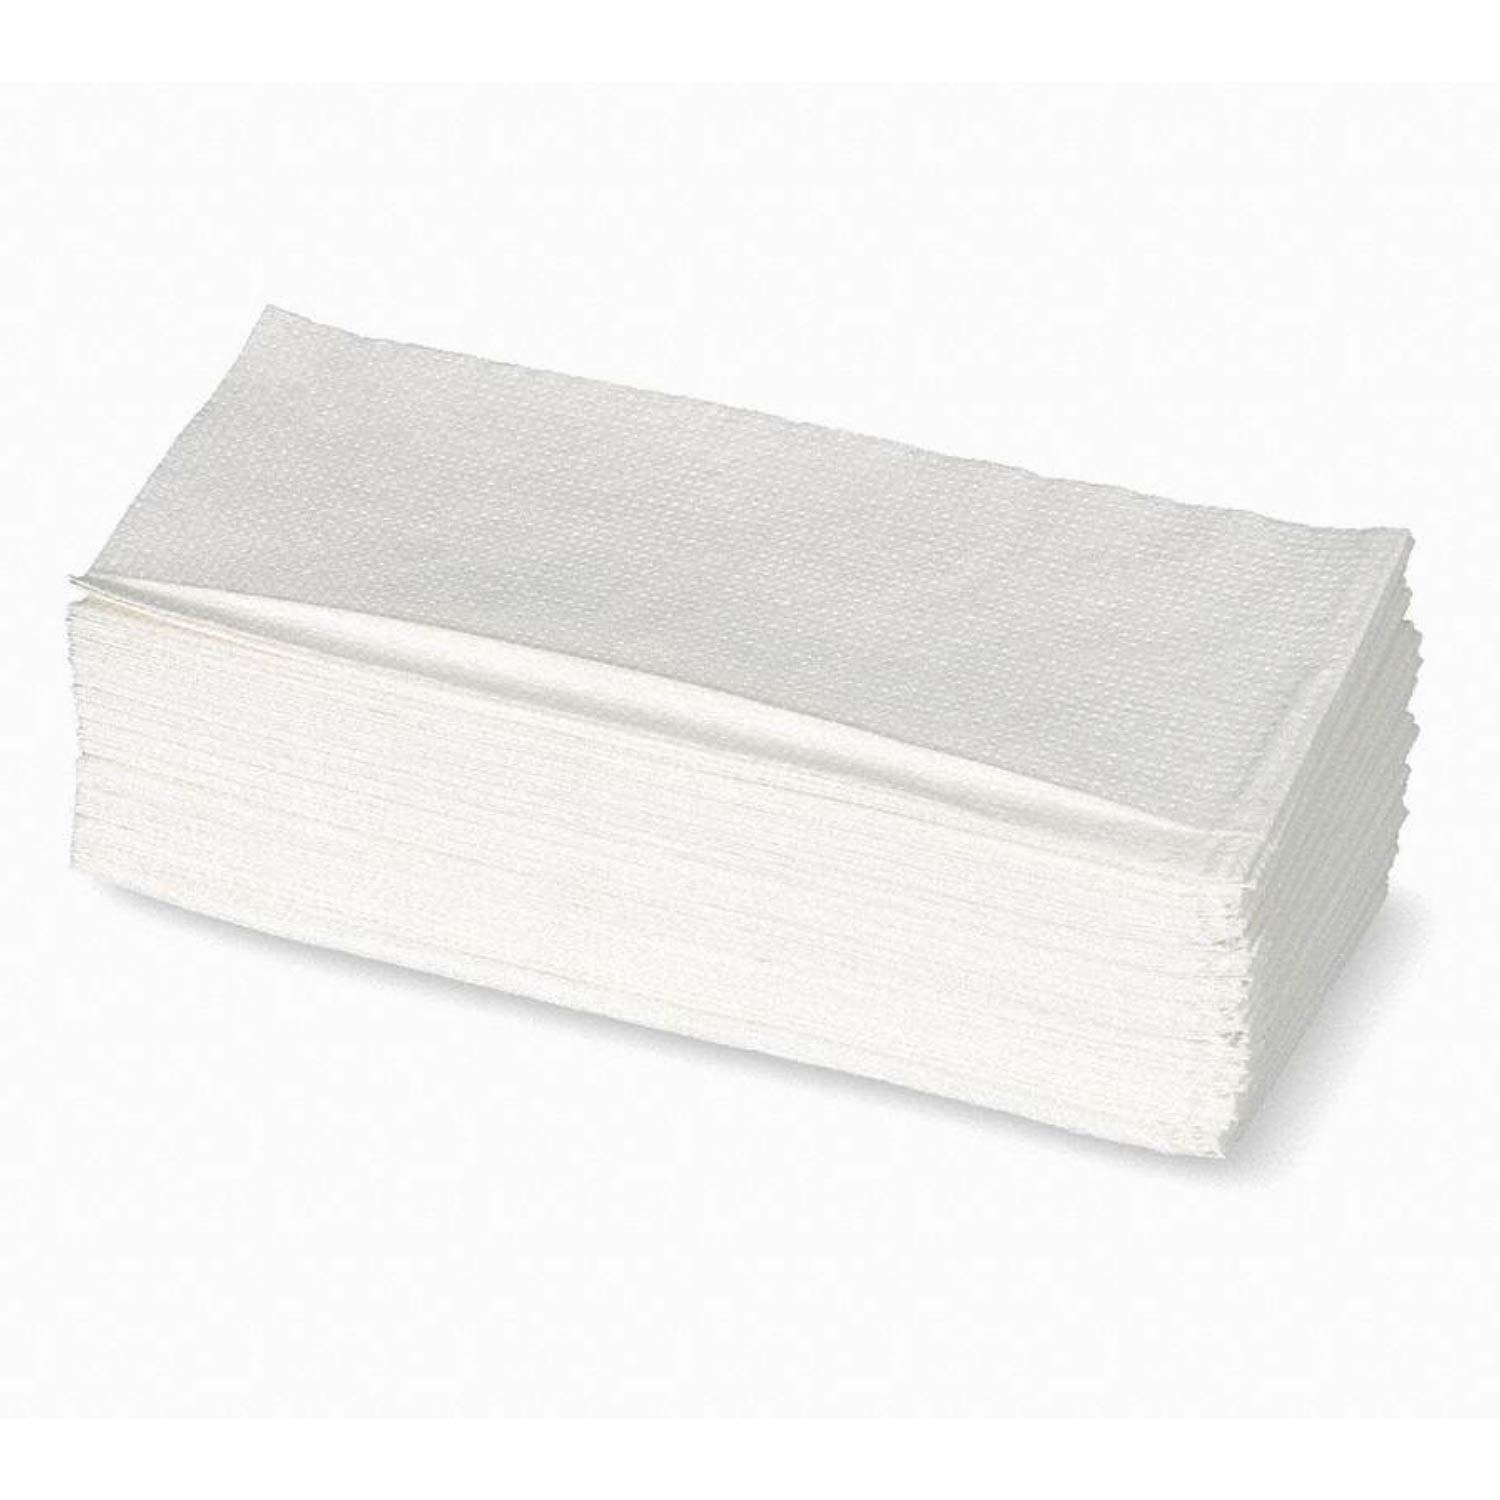 Rubbermaid Commercial Baby Changing Table Pad, Pack of 320 (FG781788WHT)